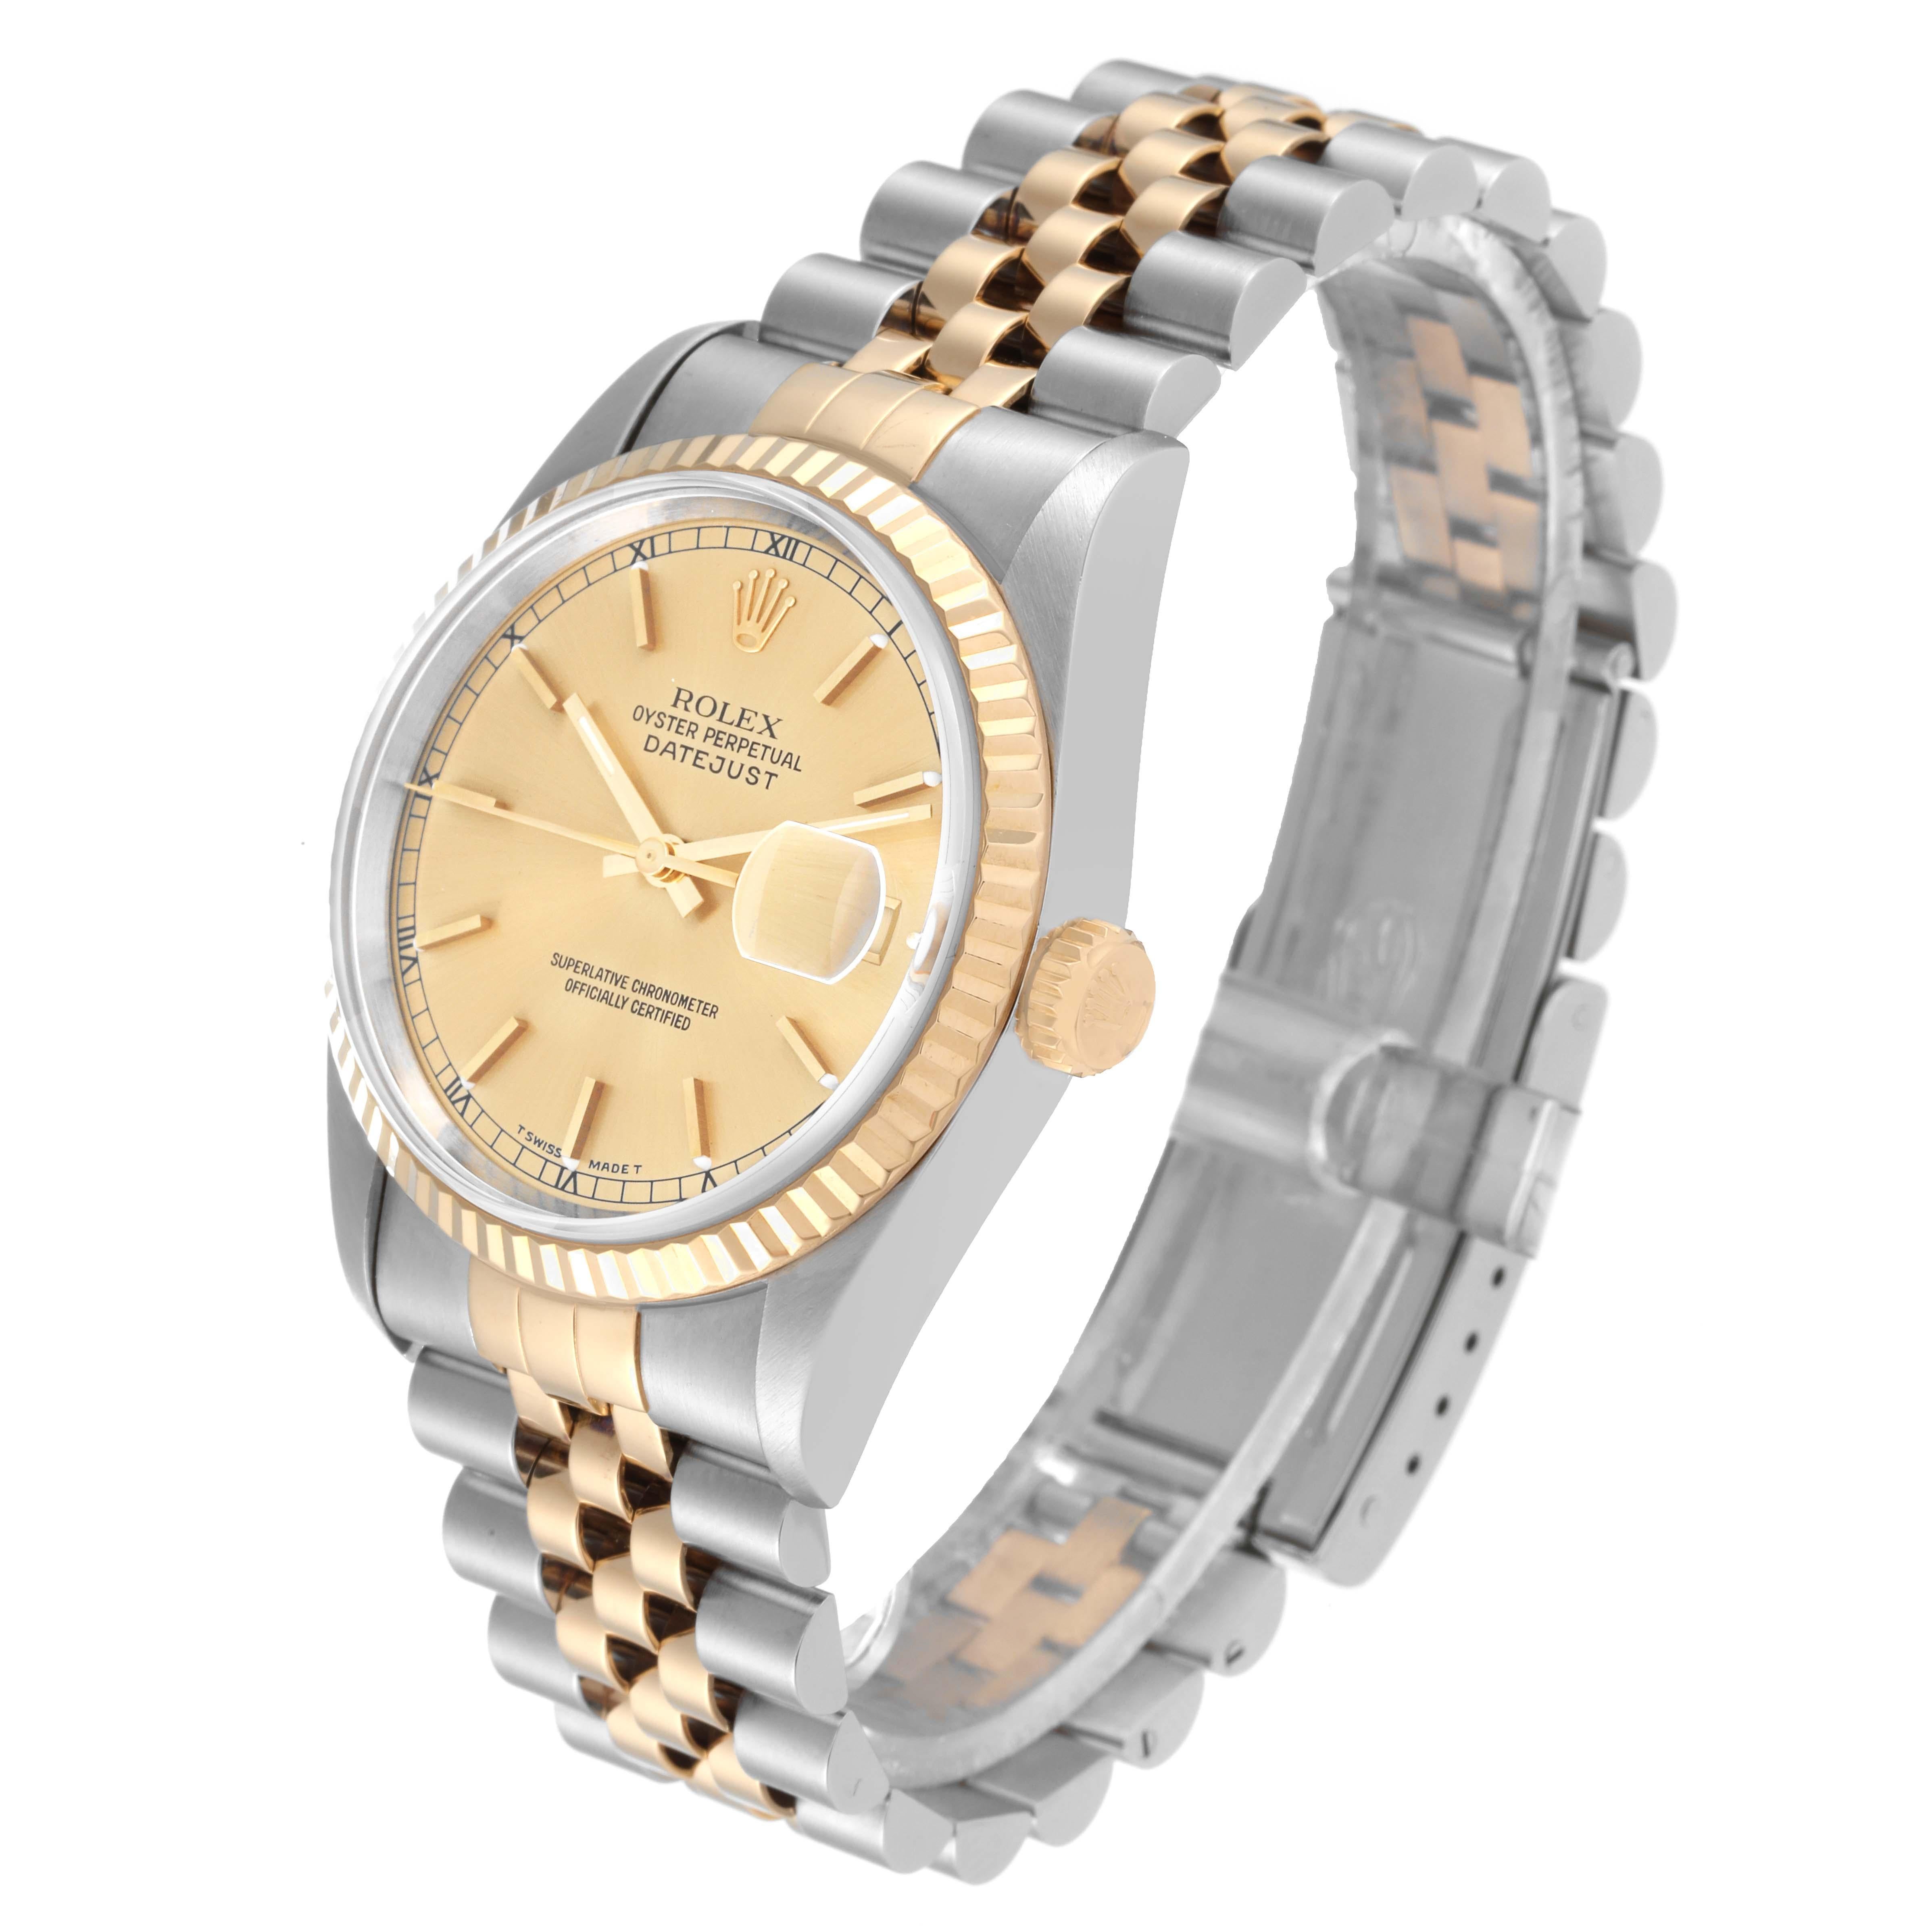 Rolex Datejust 36 Steel Yellow Gold Champagne Dial Mens Watch 16233 Box Papers For Sale 4